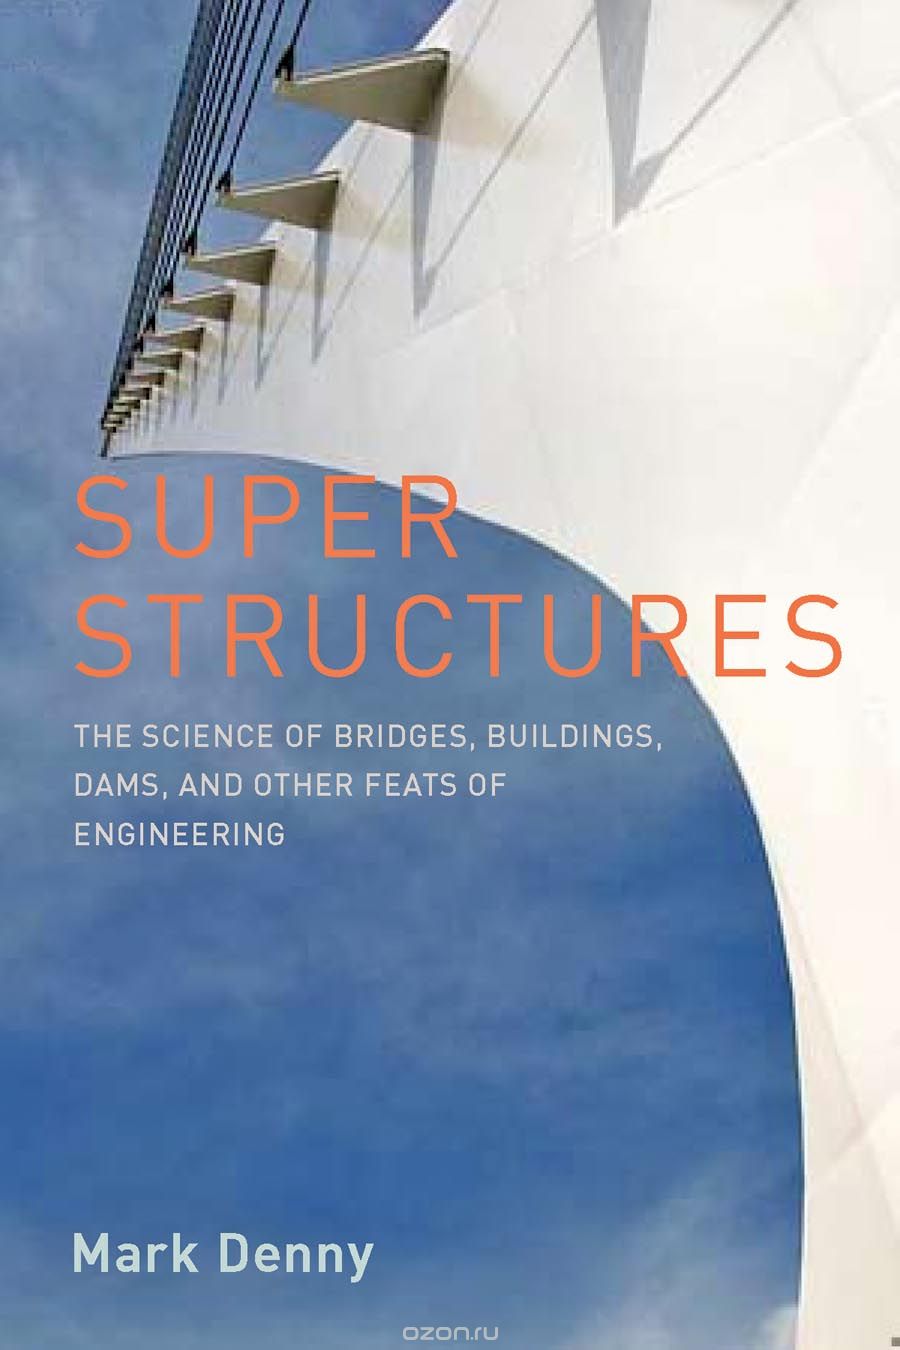 Скачать книгу "Super Structures – The Science of Bridges, Buildings, Dams, and Other Feats of Engineering"